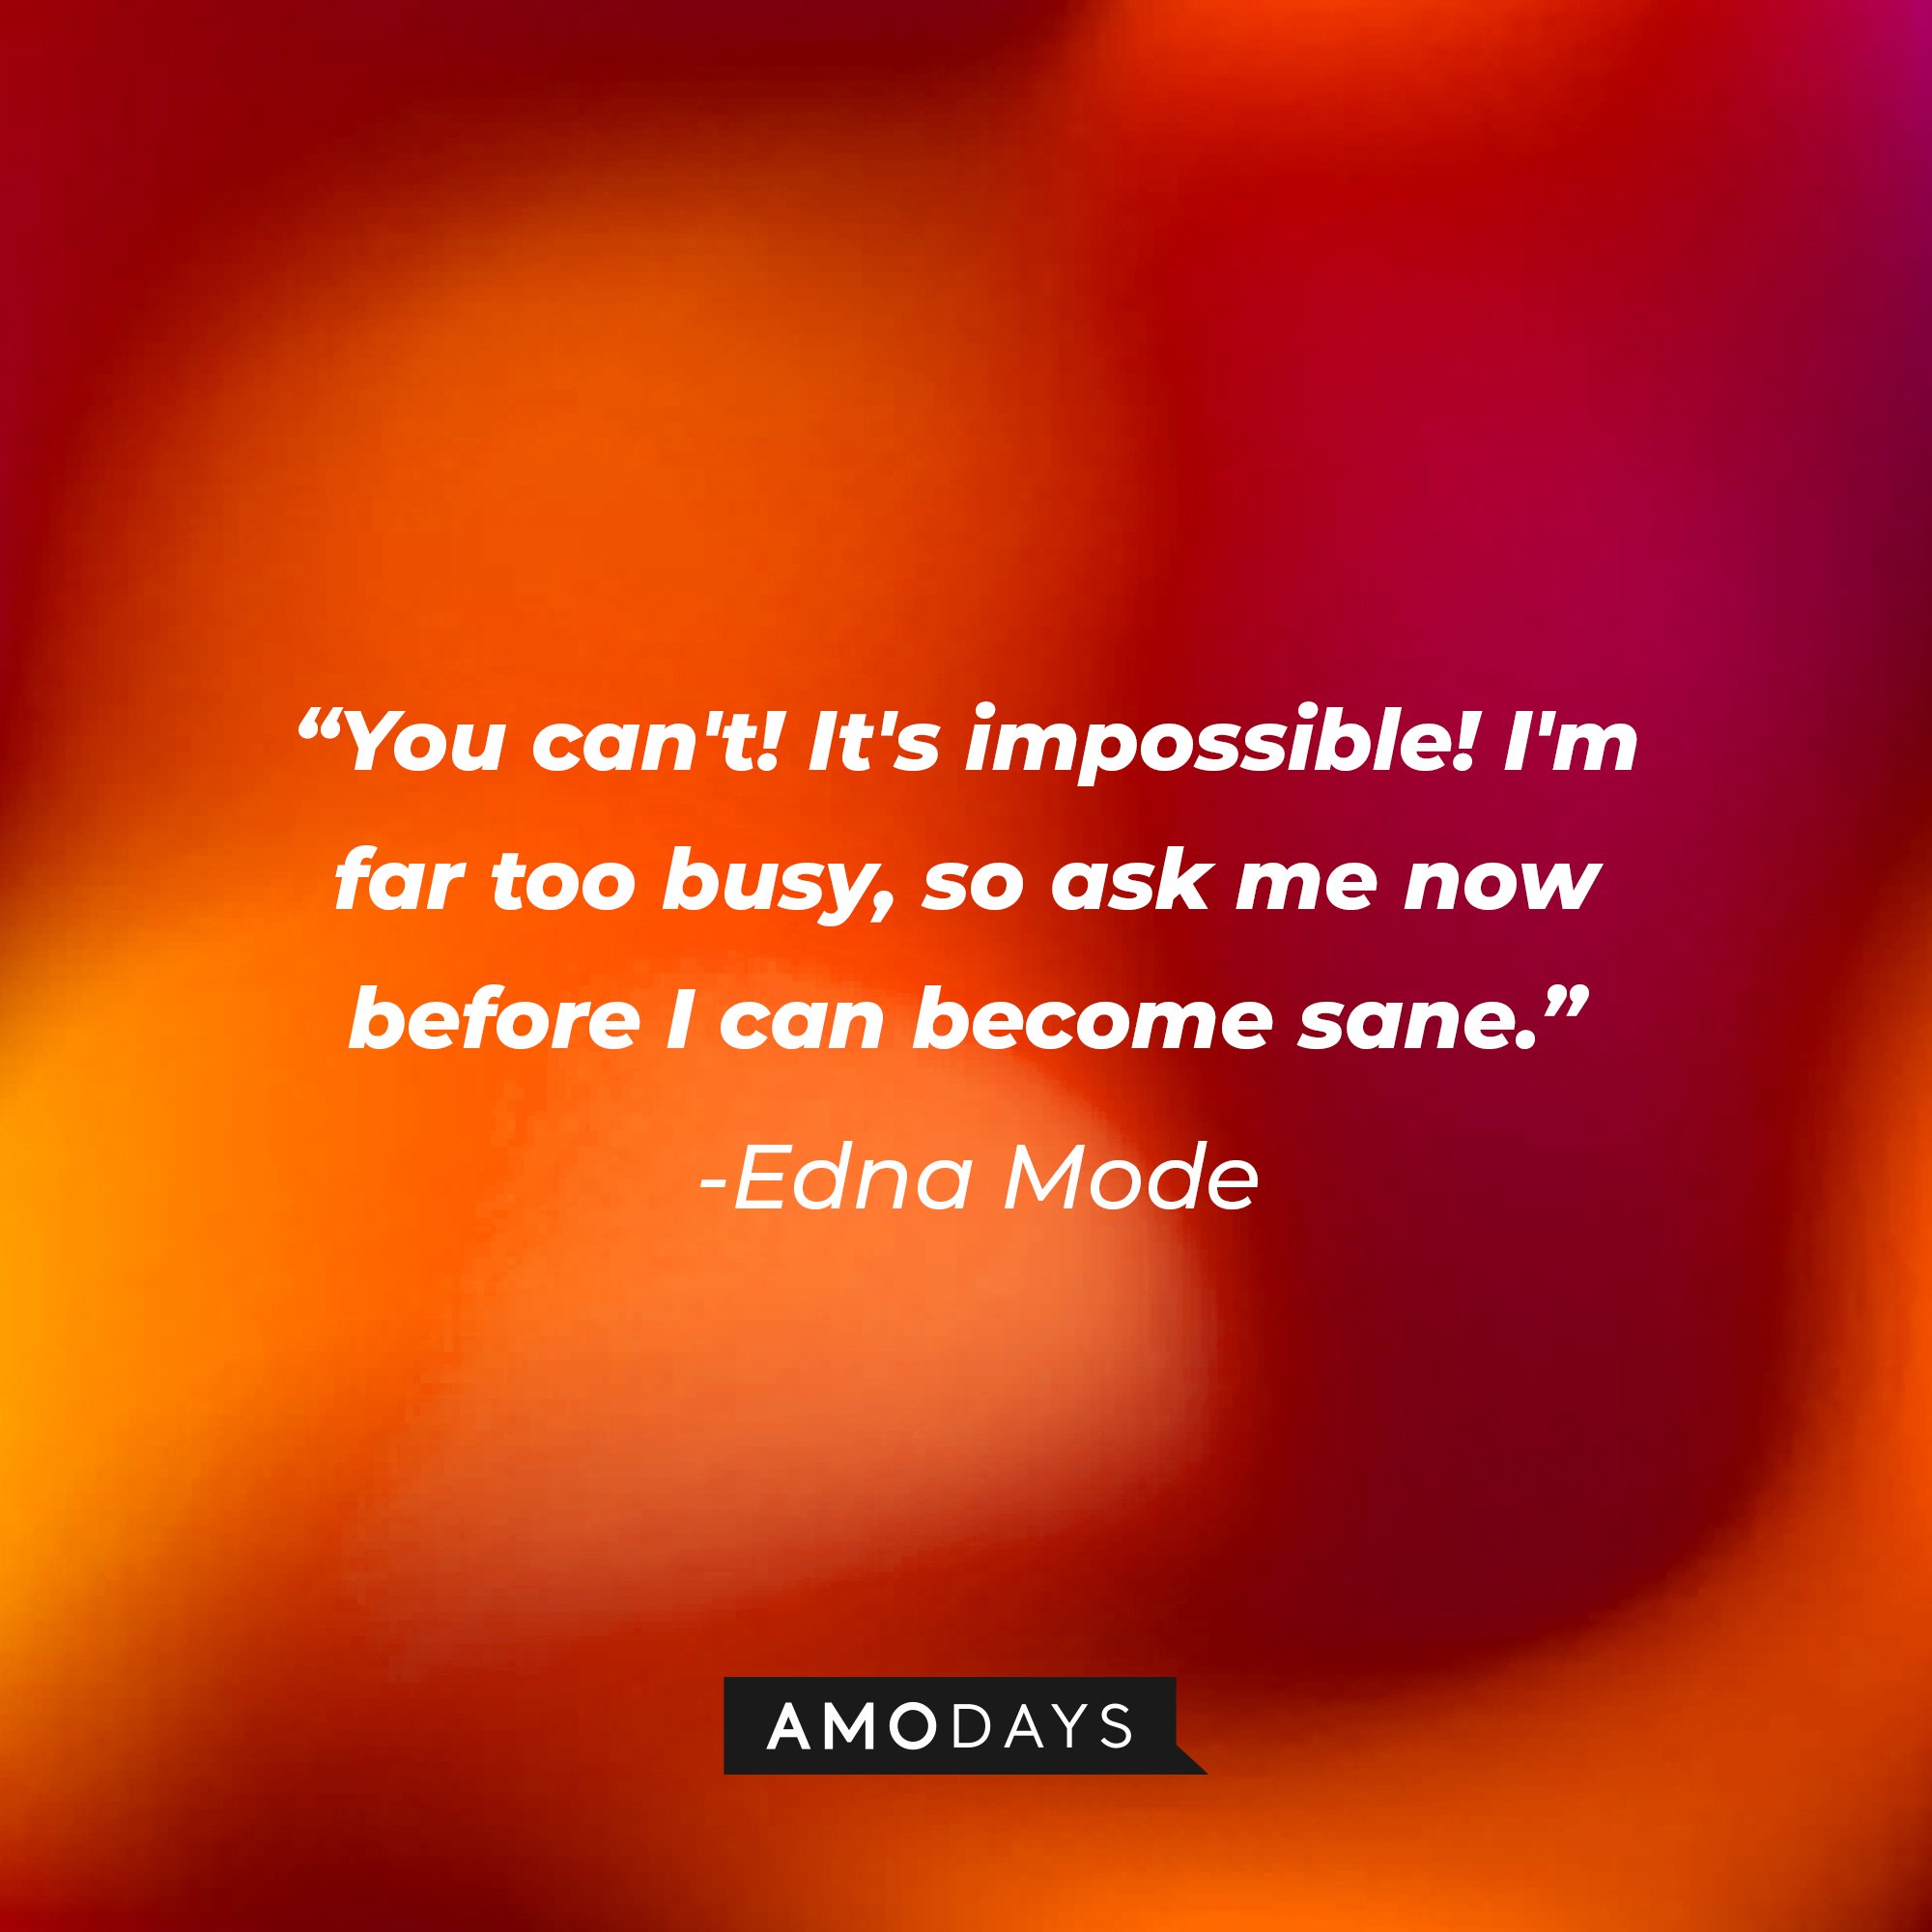 Edna Mode’s quote: "You can't! It's impossible! I'm far too busy, so ask me now before I can become sane." | Image: AmoDays